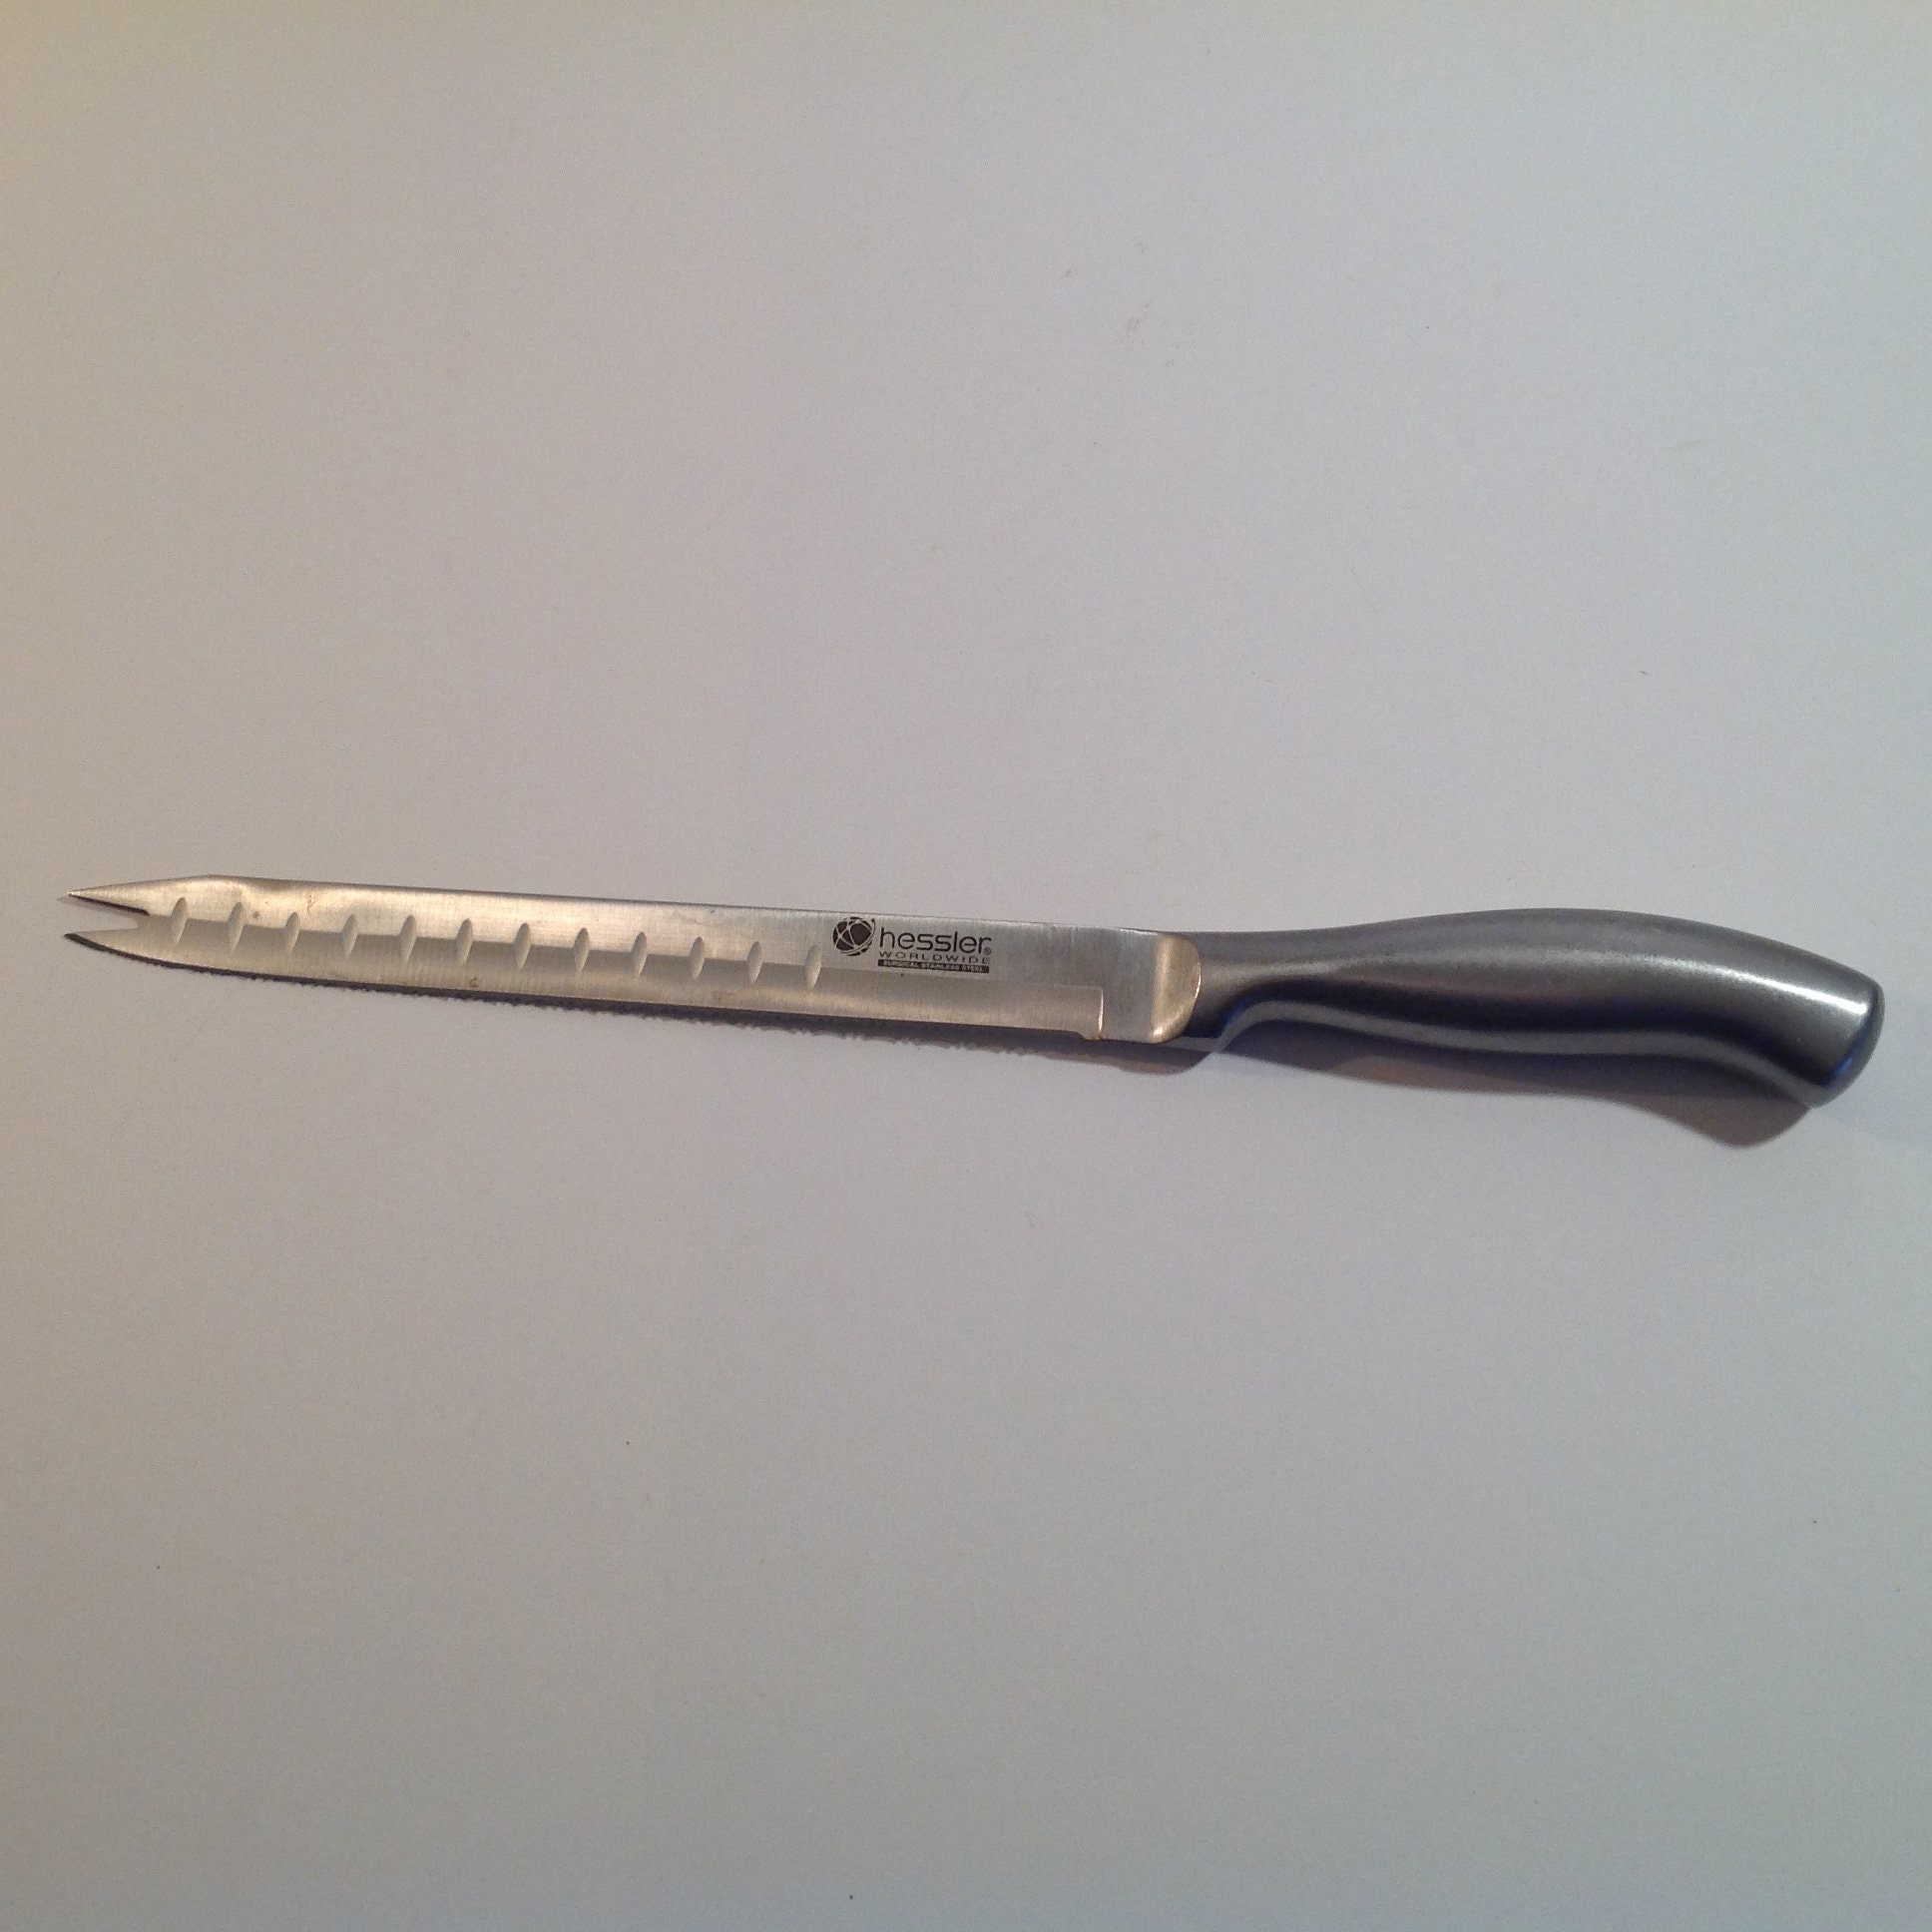  Customer reviews: Hessler Chef Series Surgical